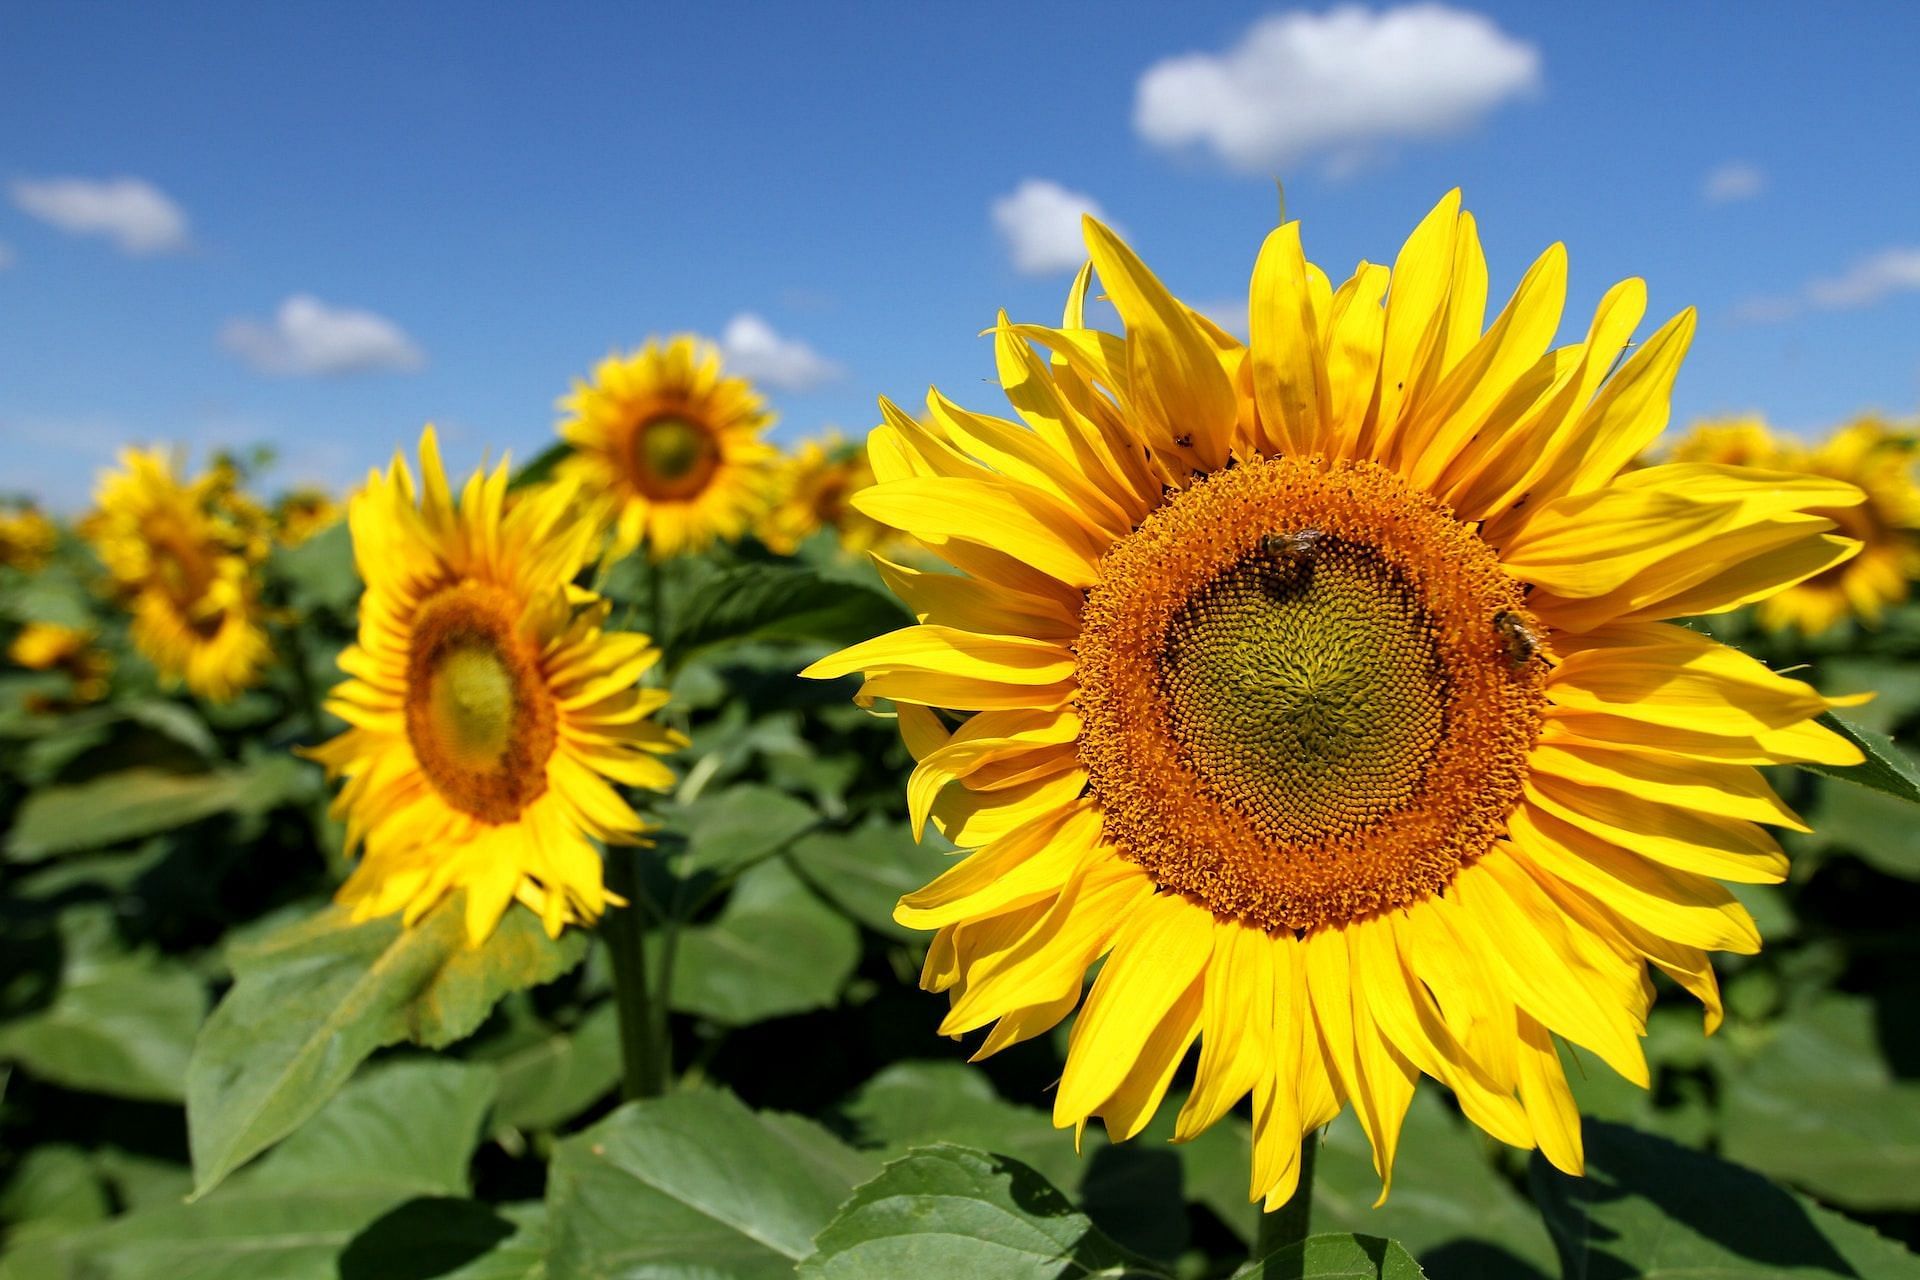 Sunflower oil bad for you? (Photo by Audrius Sutkus on Unsplash)